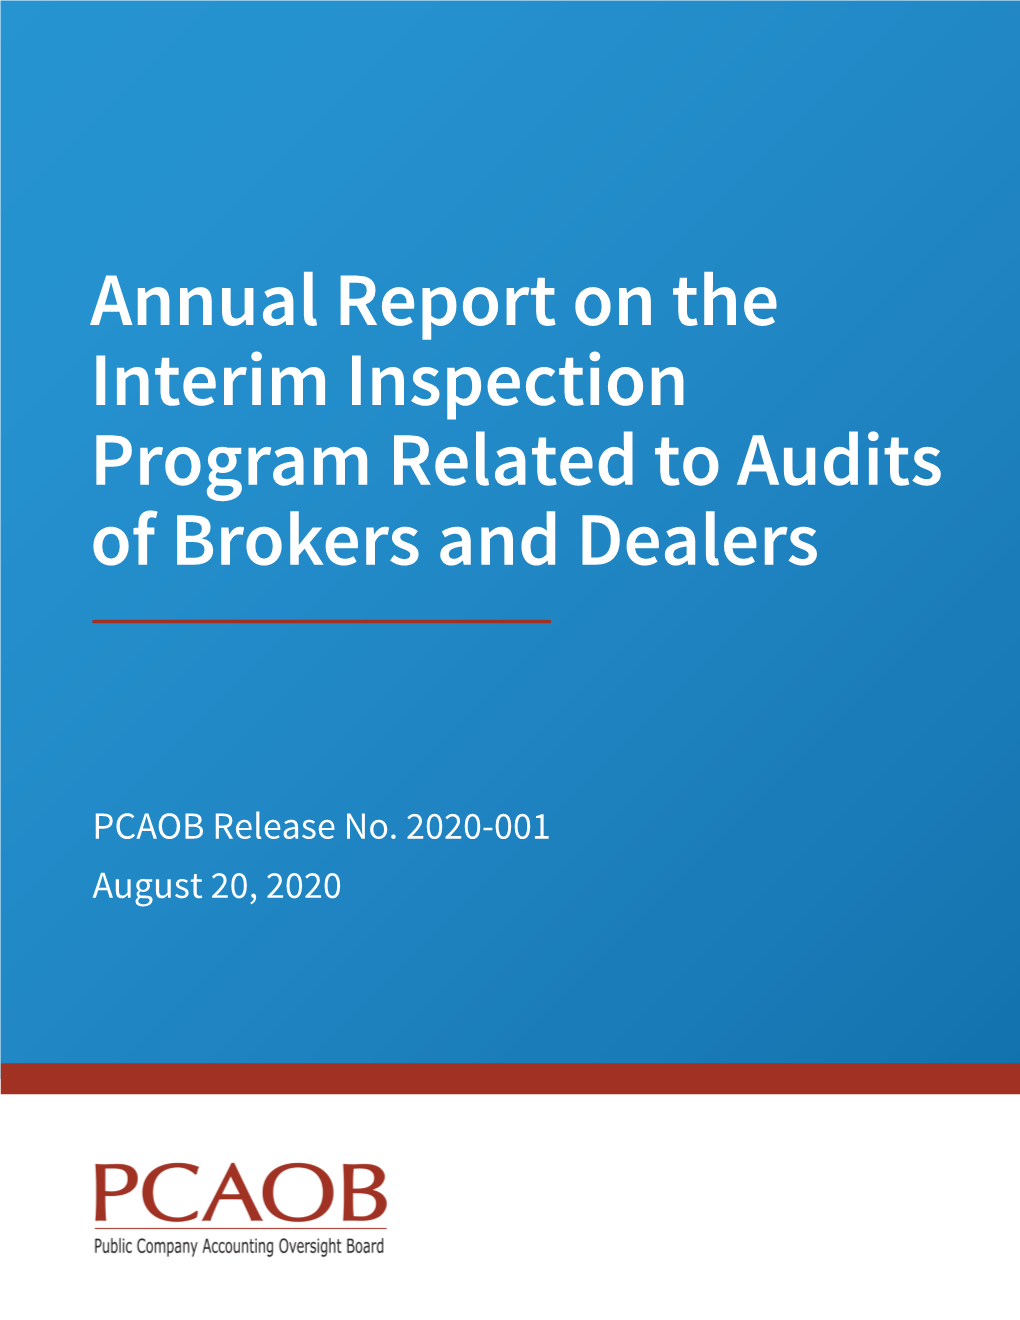 Annual Report on the Interim Inspection Program Related to Audits of Brokers and Dealers